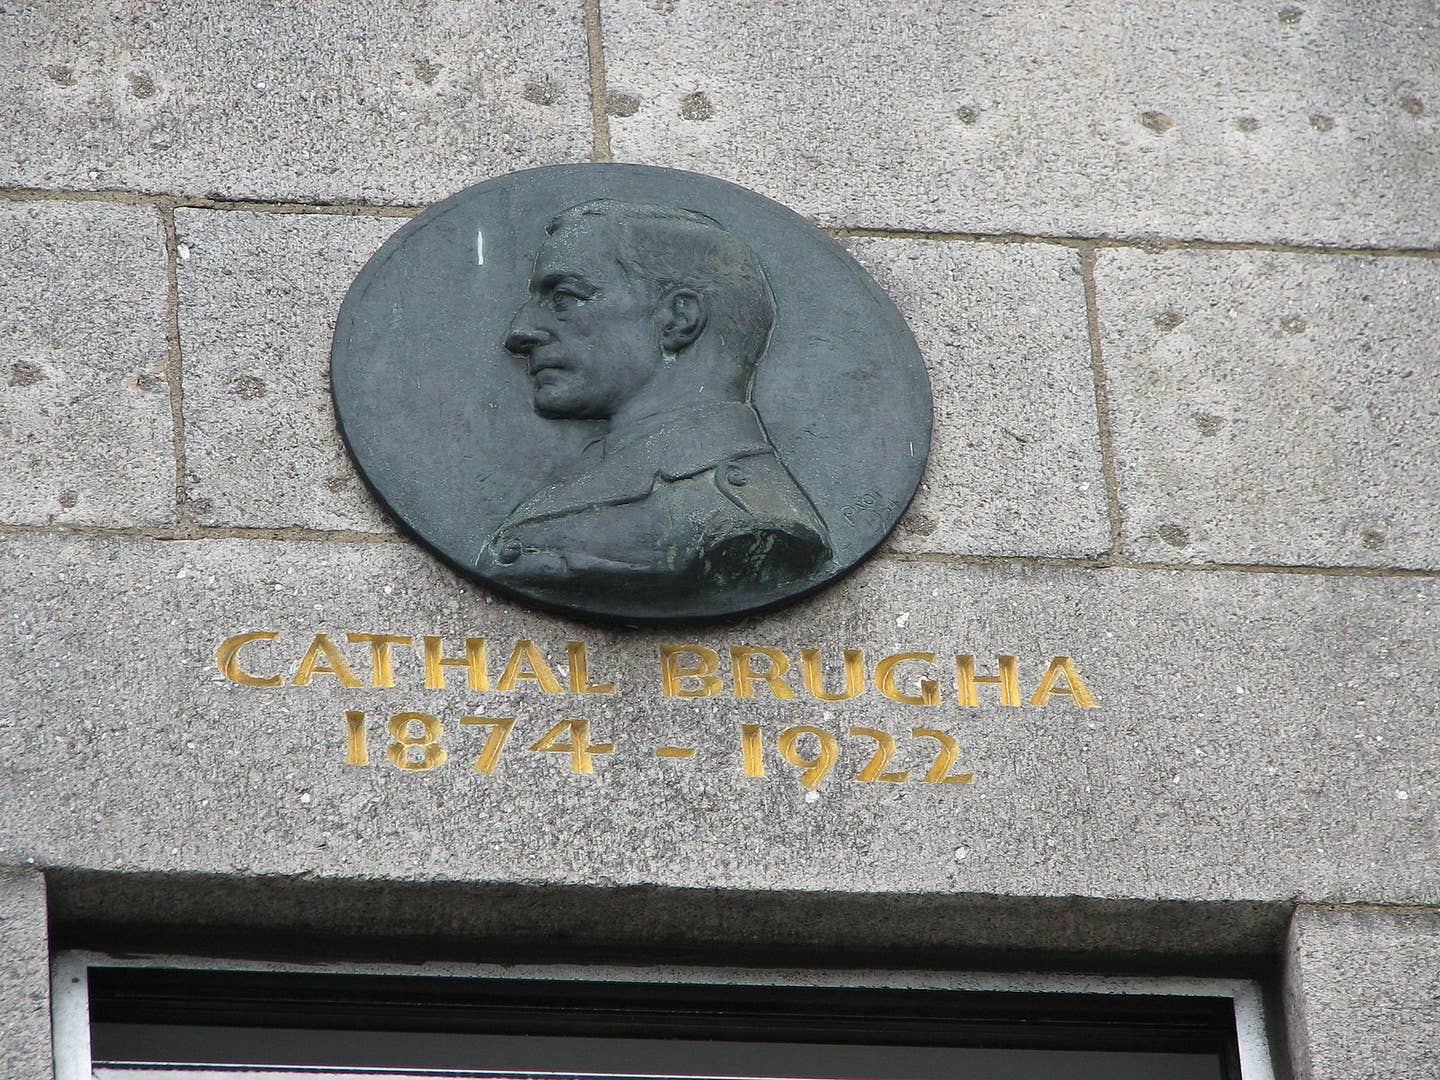 Cathal Brughadid easter uprising plaque